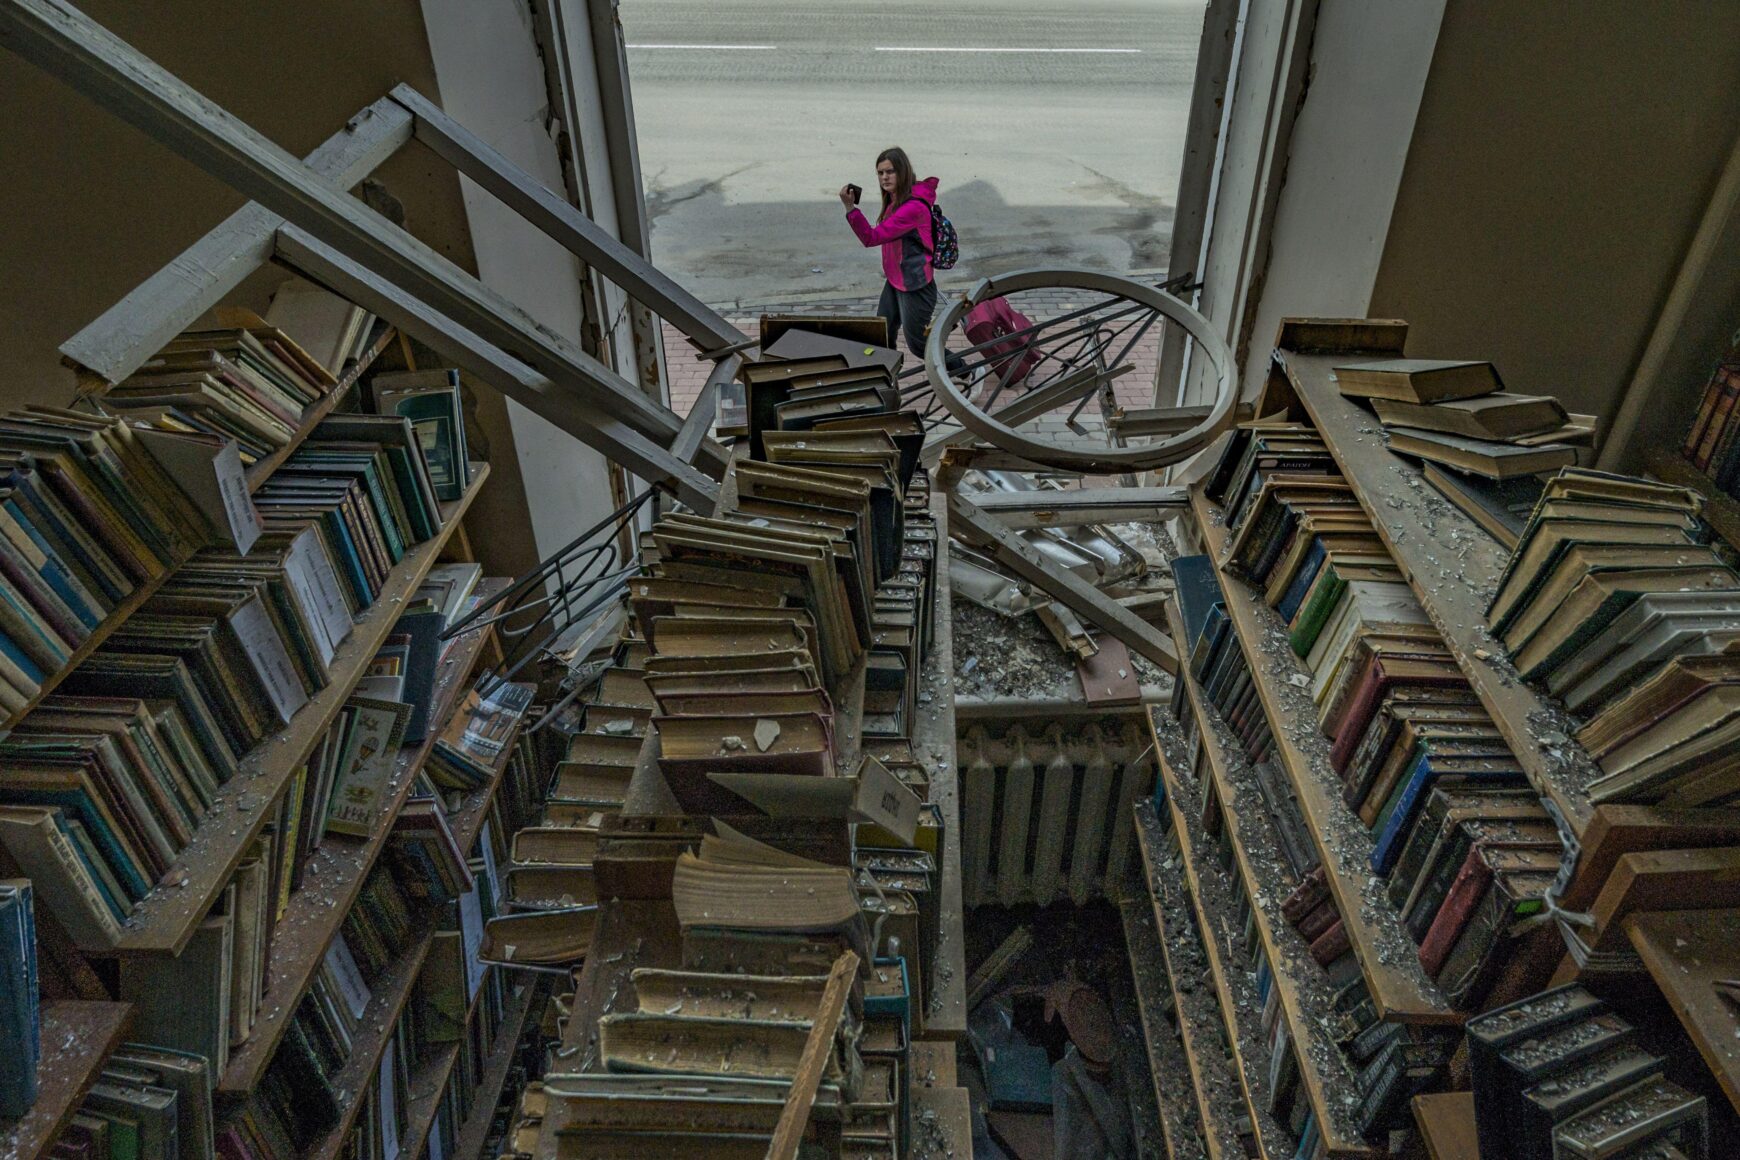 The Chernihiv Regional Youth Library, damaged by a bombing on March 11, 2022